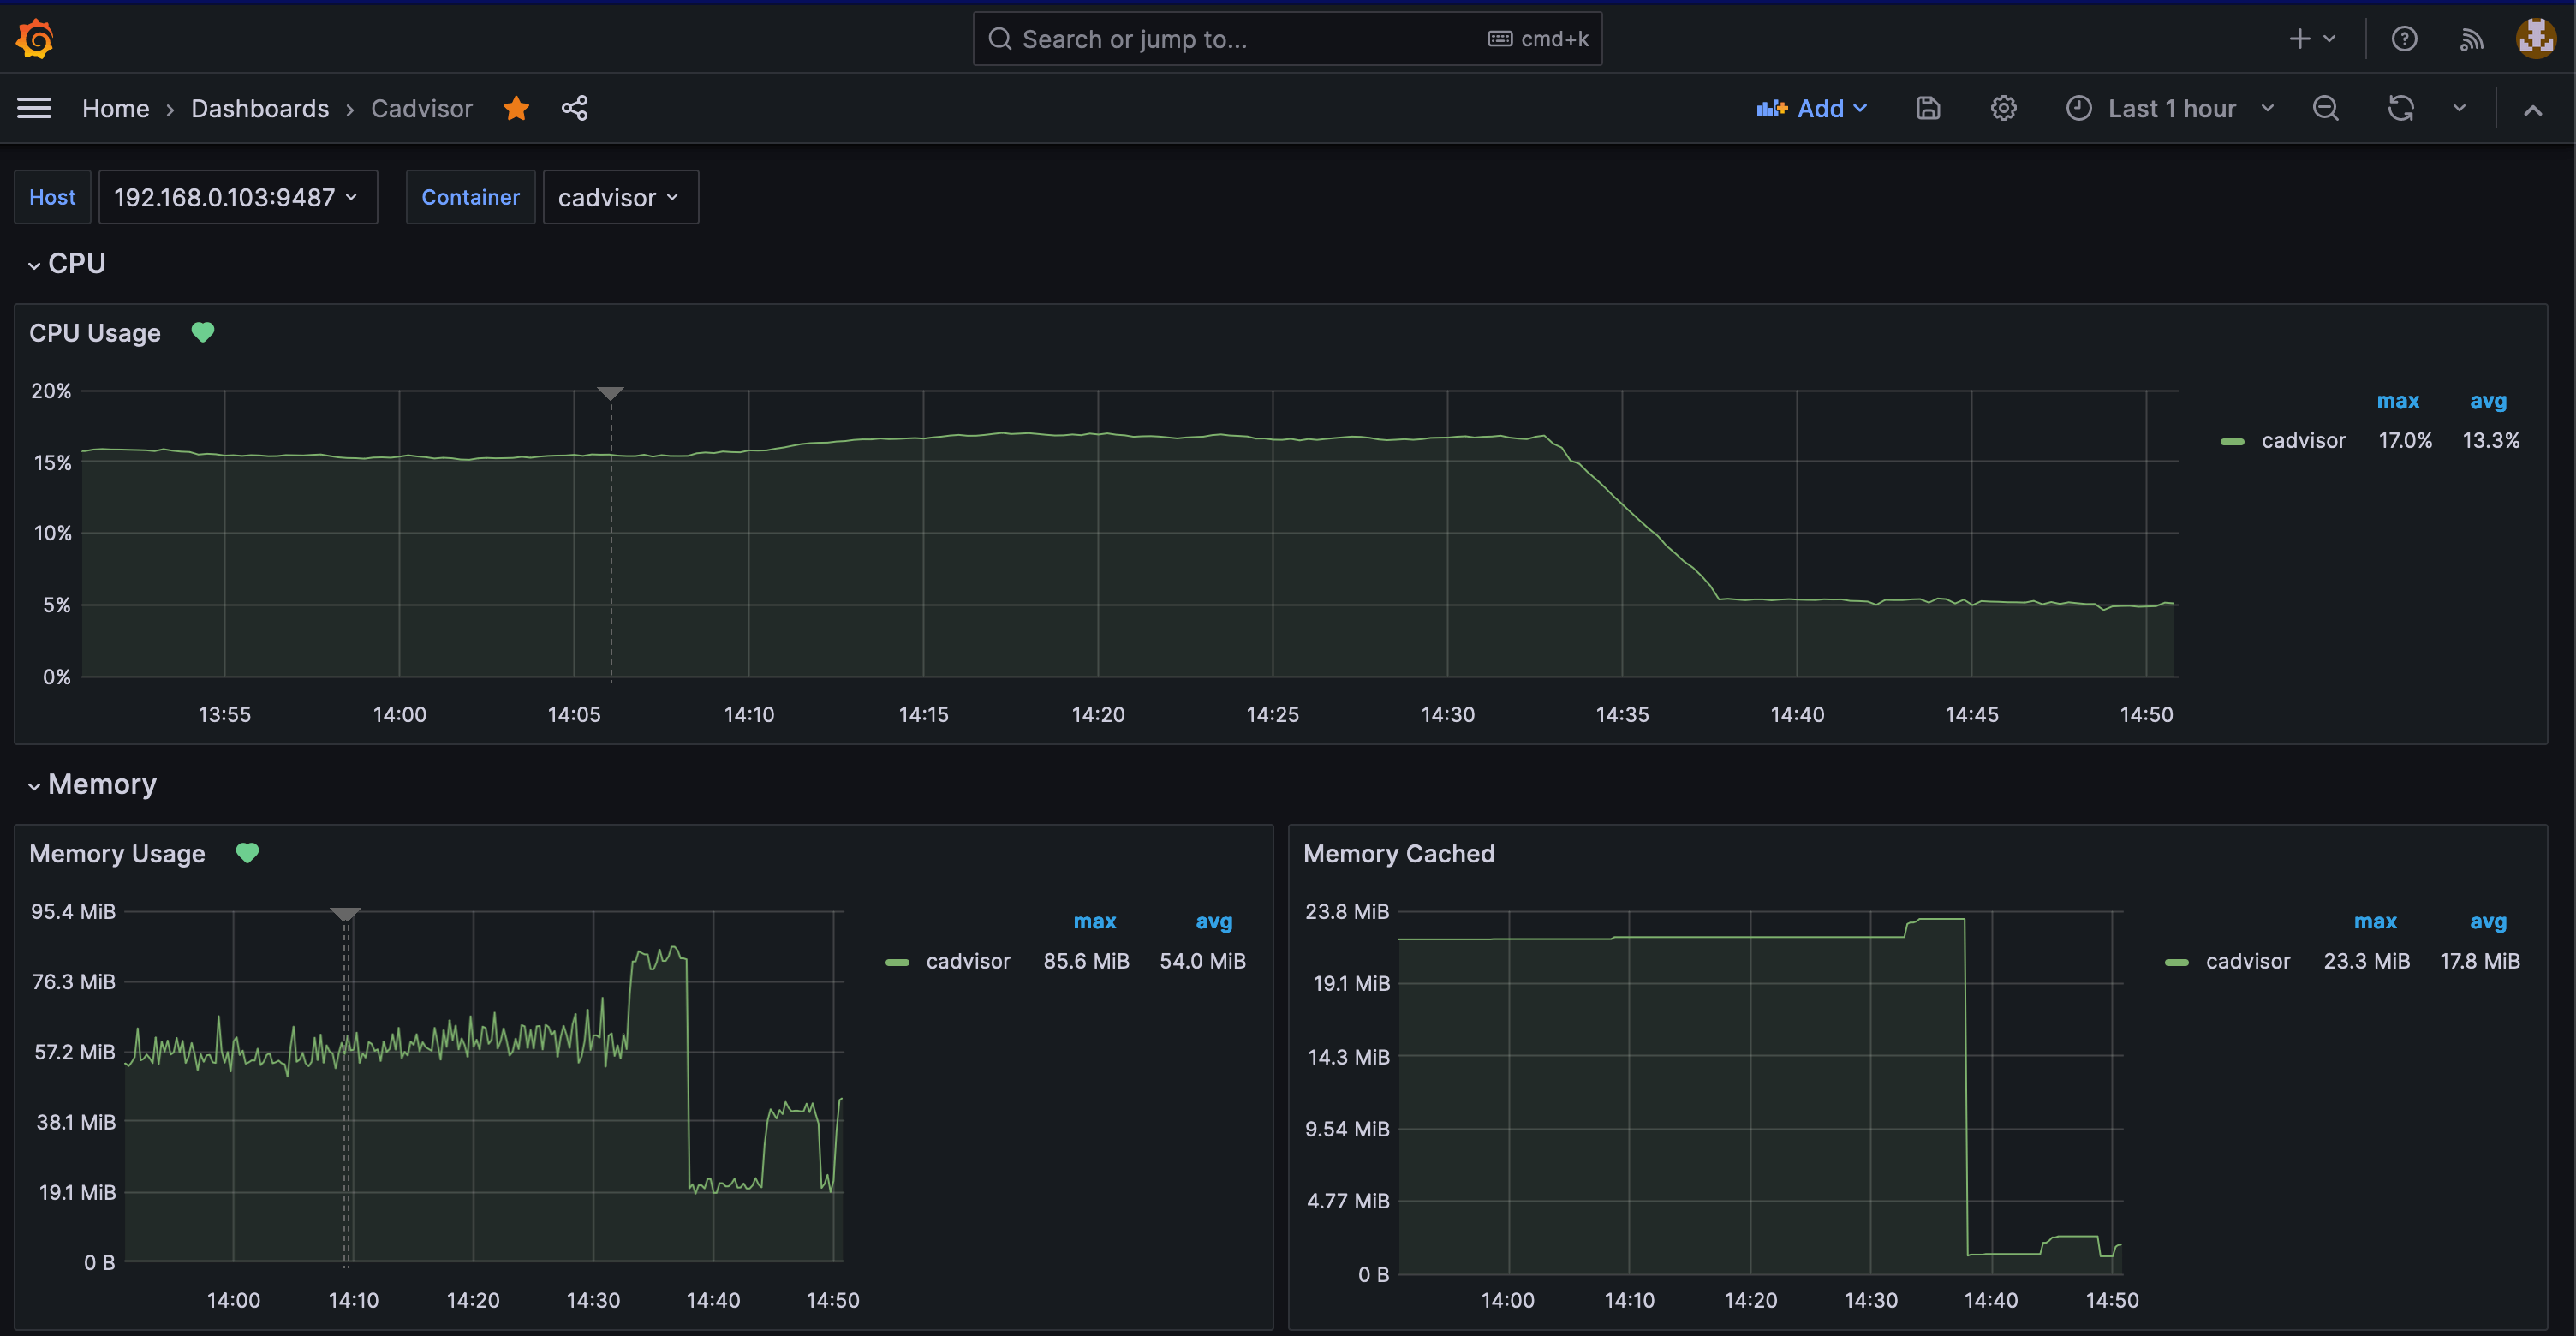 CPU Usage of cAdvisor before and after the changes